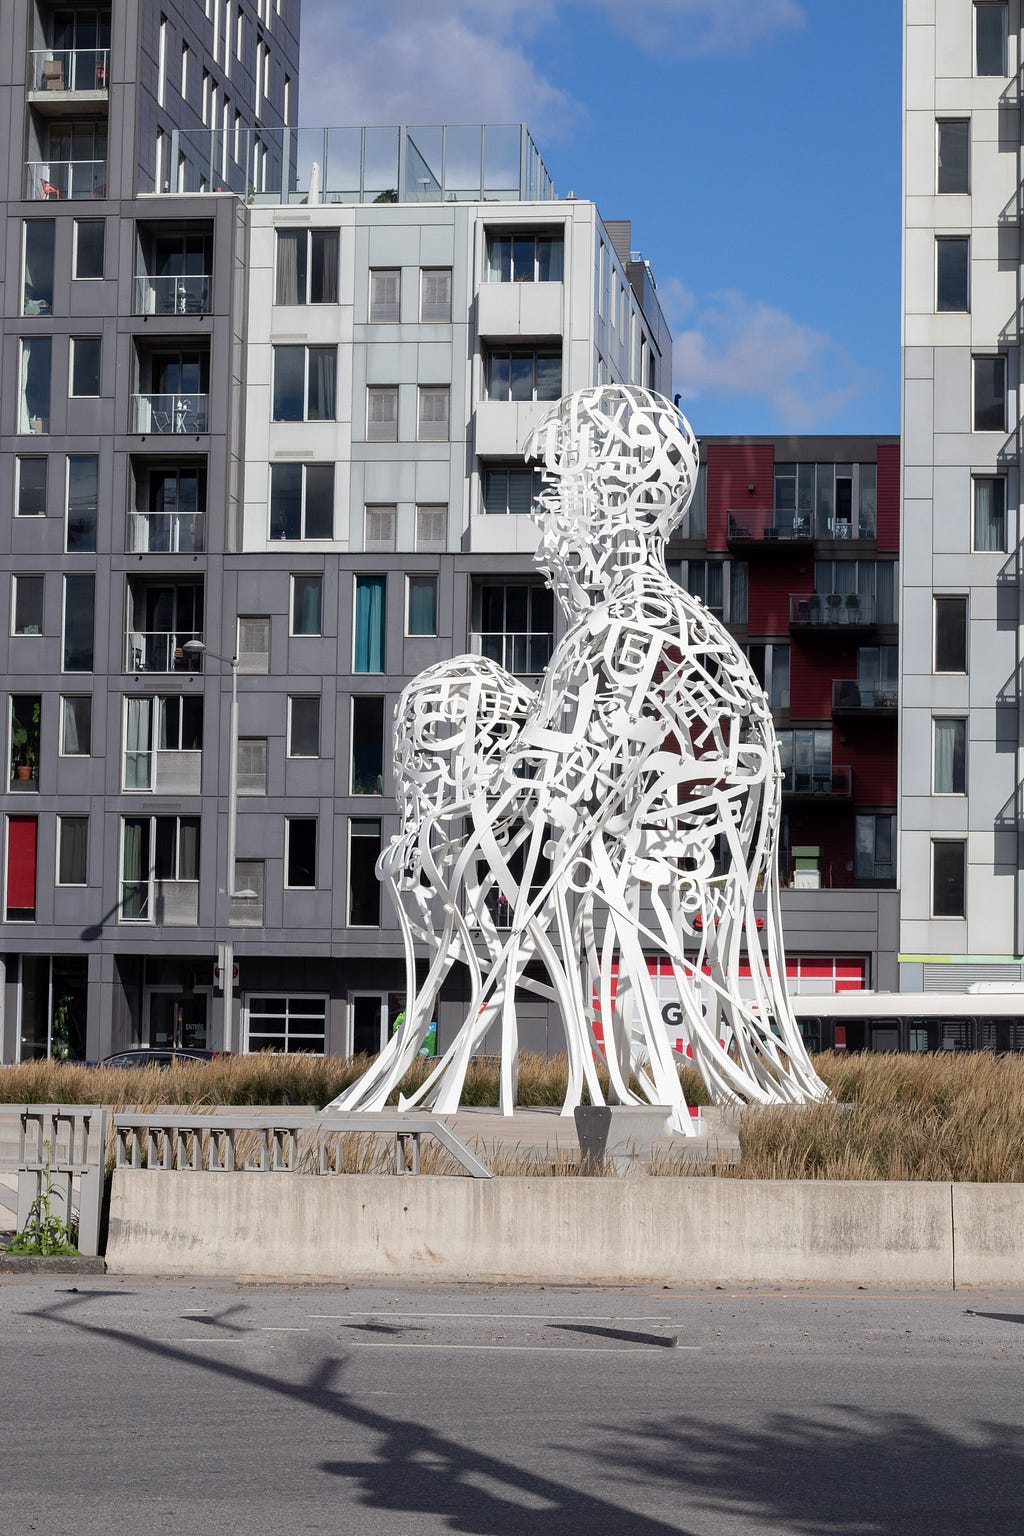 A large white sculpture with a backdrop of skyscrapers. The sculptur is a human figure made of white wires.